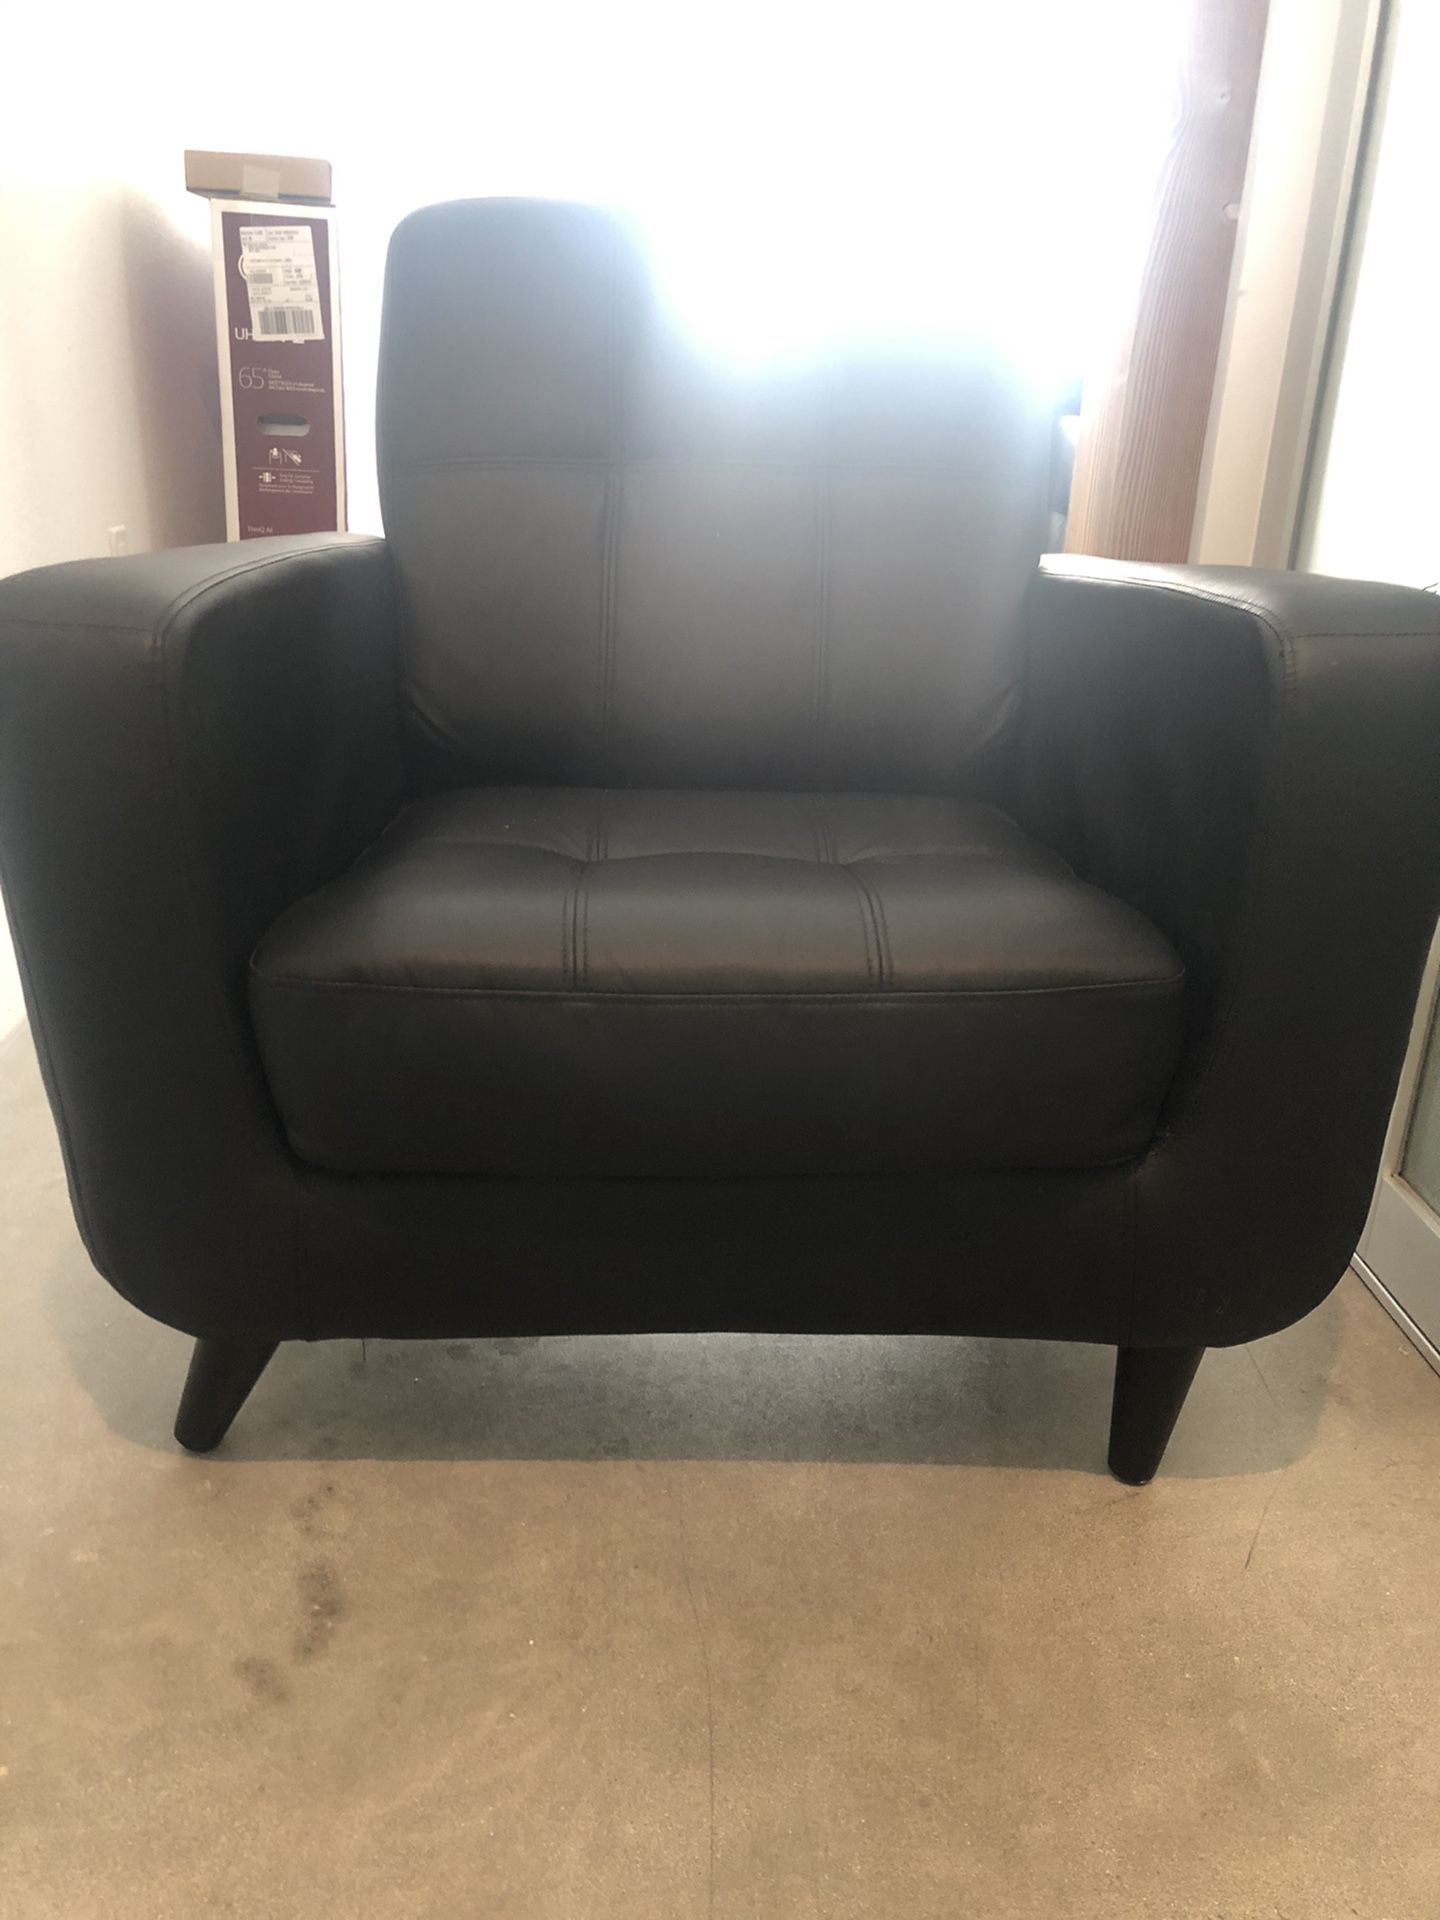 Black faux leather love seat